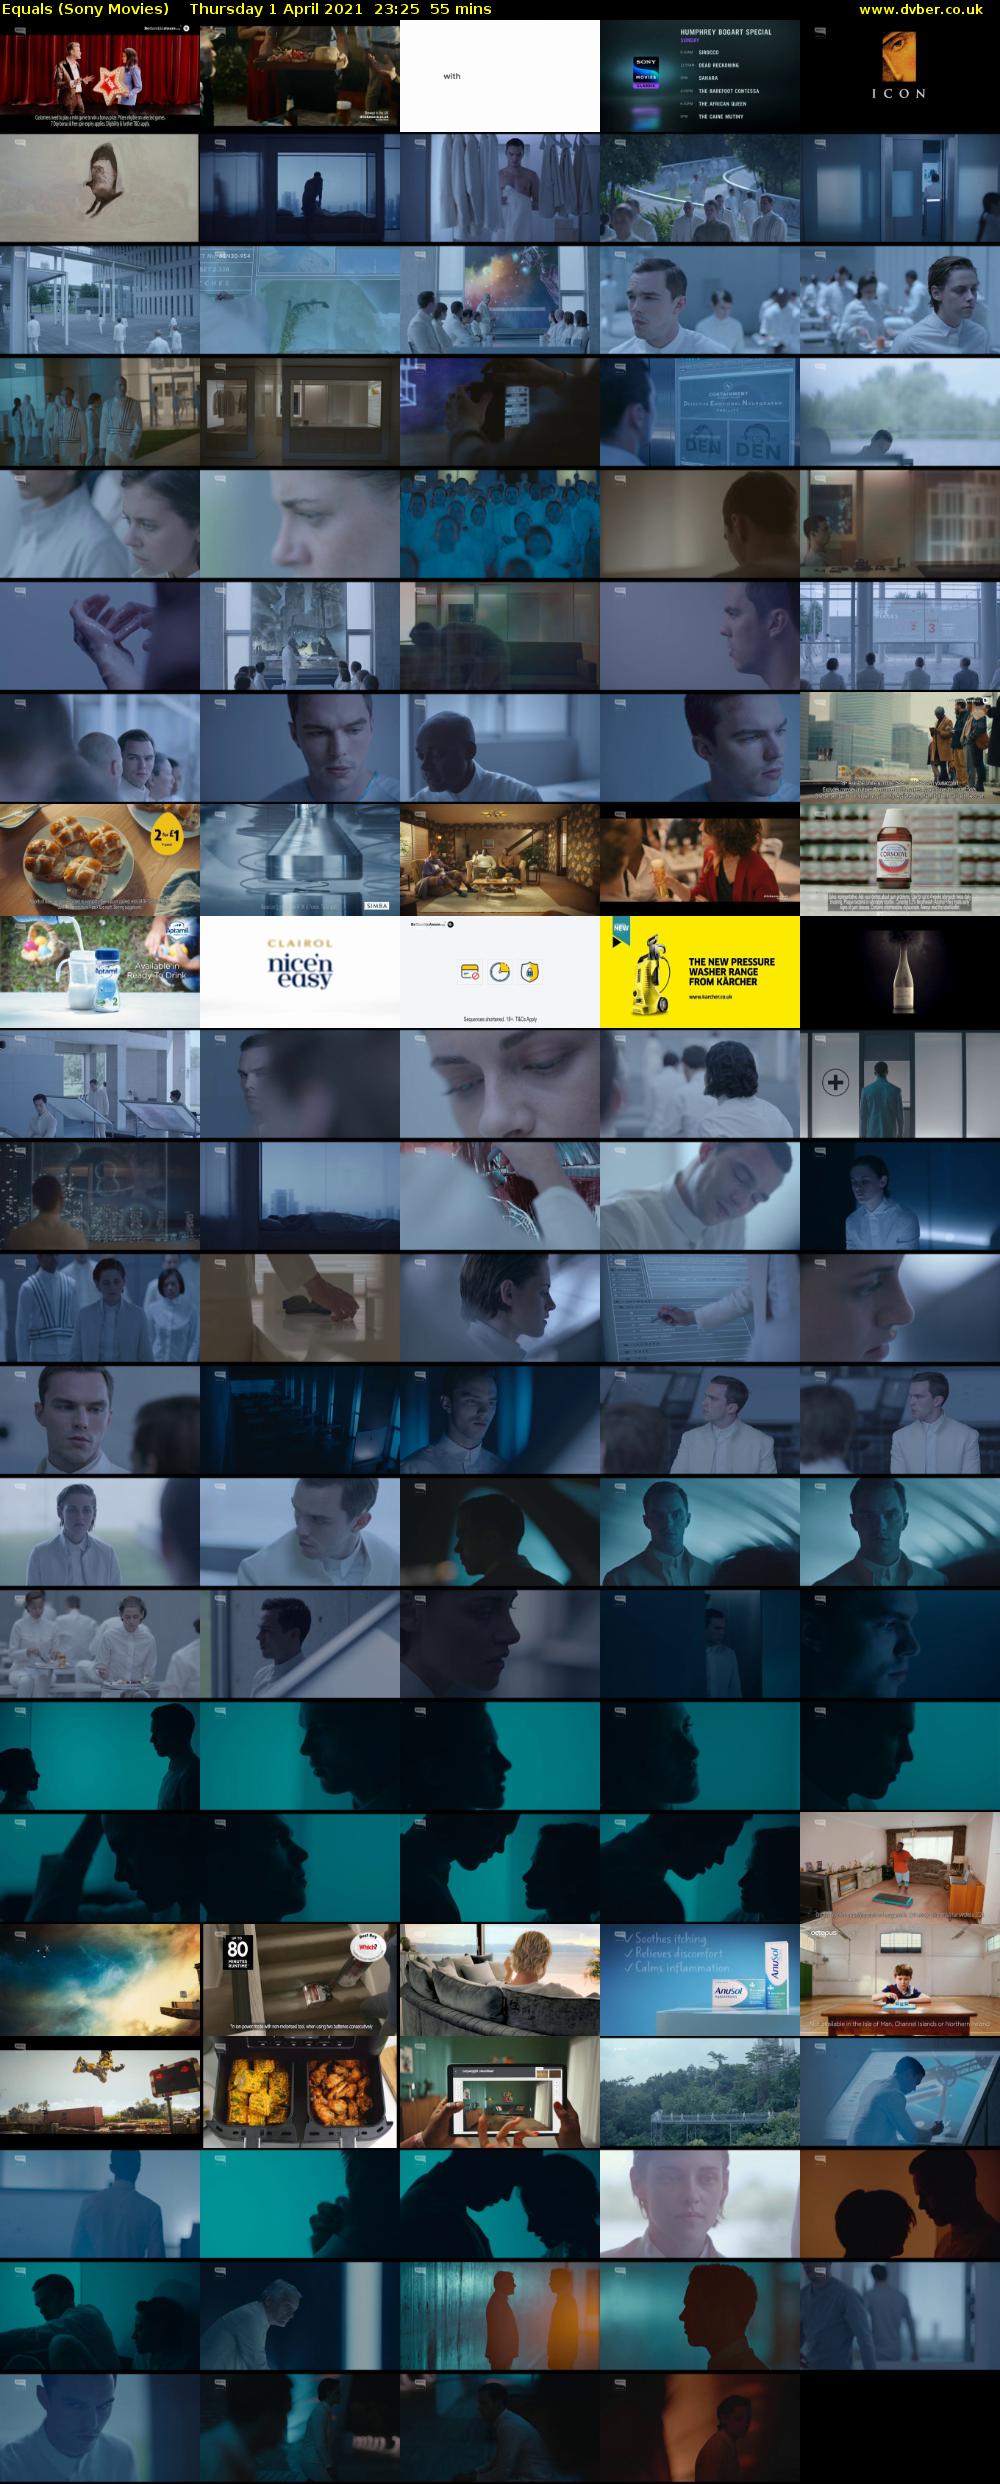 Equals (Sony Movies) Thursday 1 April 2021 23:25 - 00:20